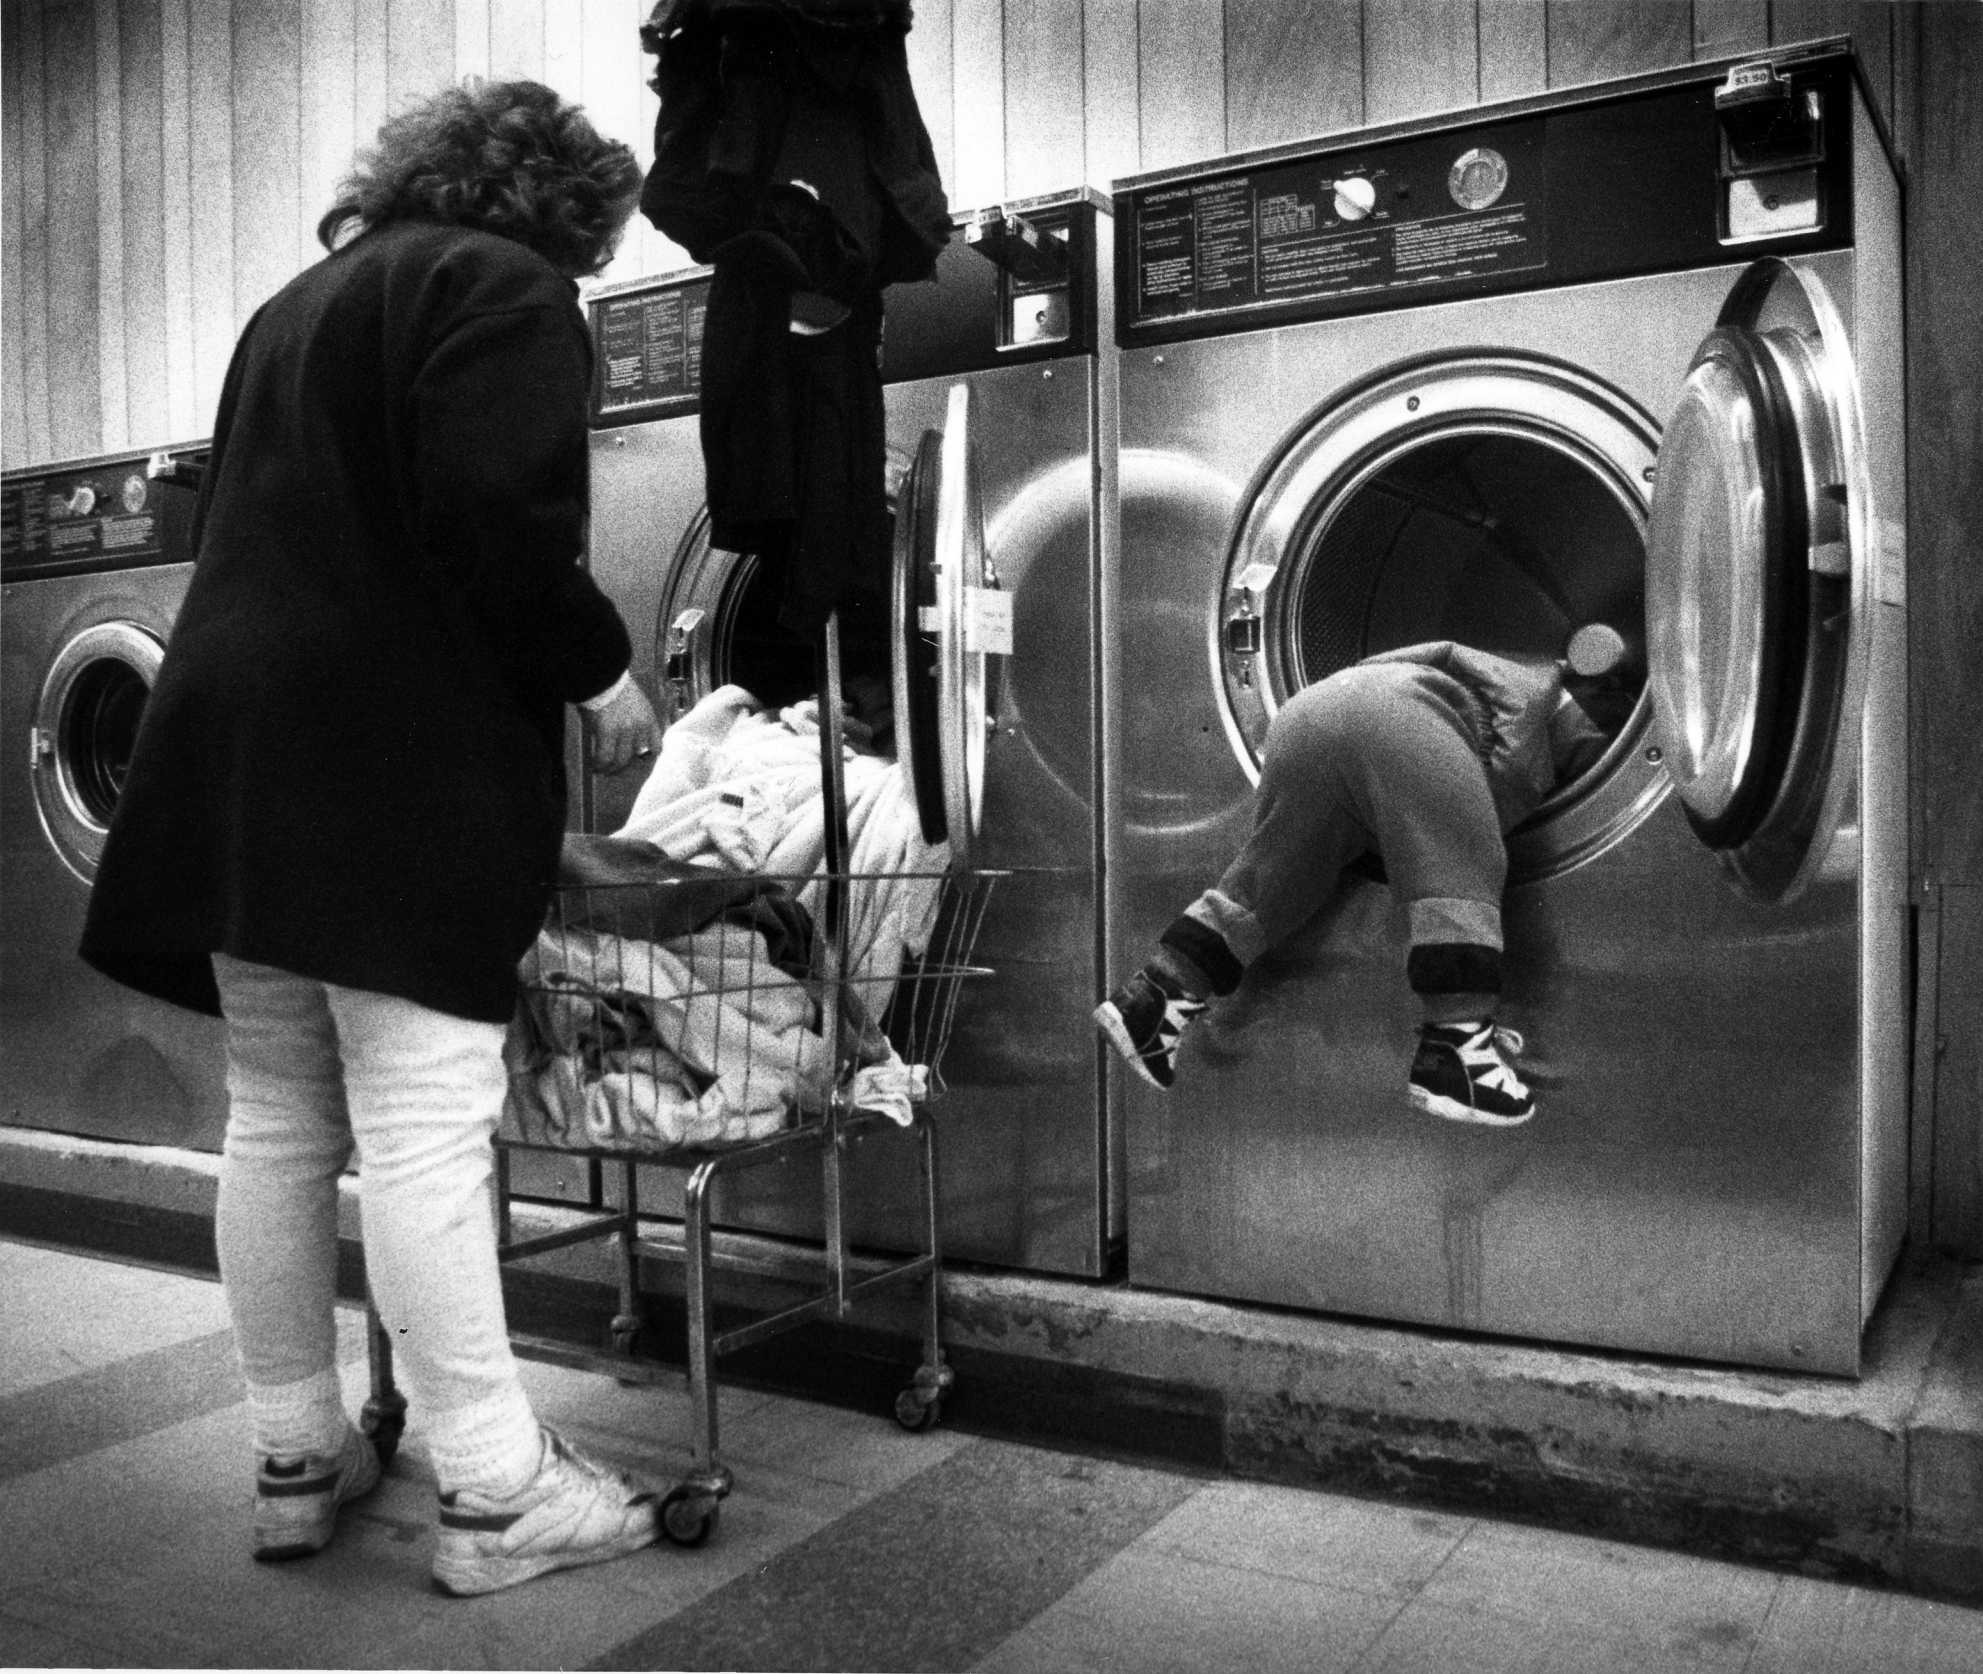 A curious toddler plays in a washing machine as his mother tends to her family's wash at a  local laundromat. 1994